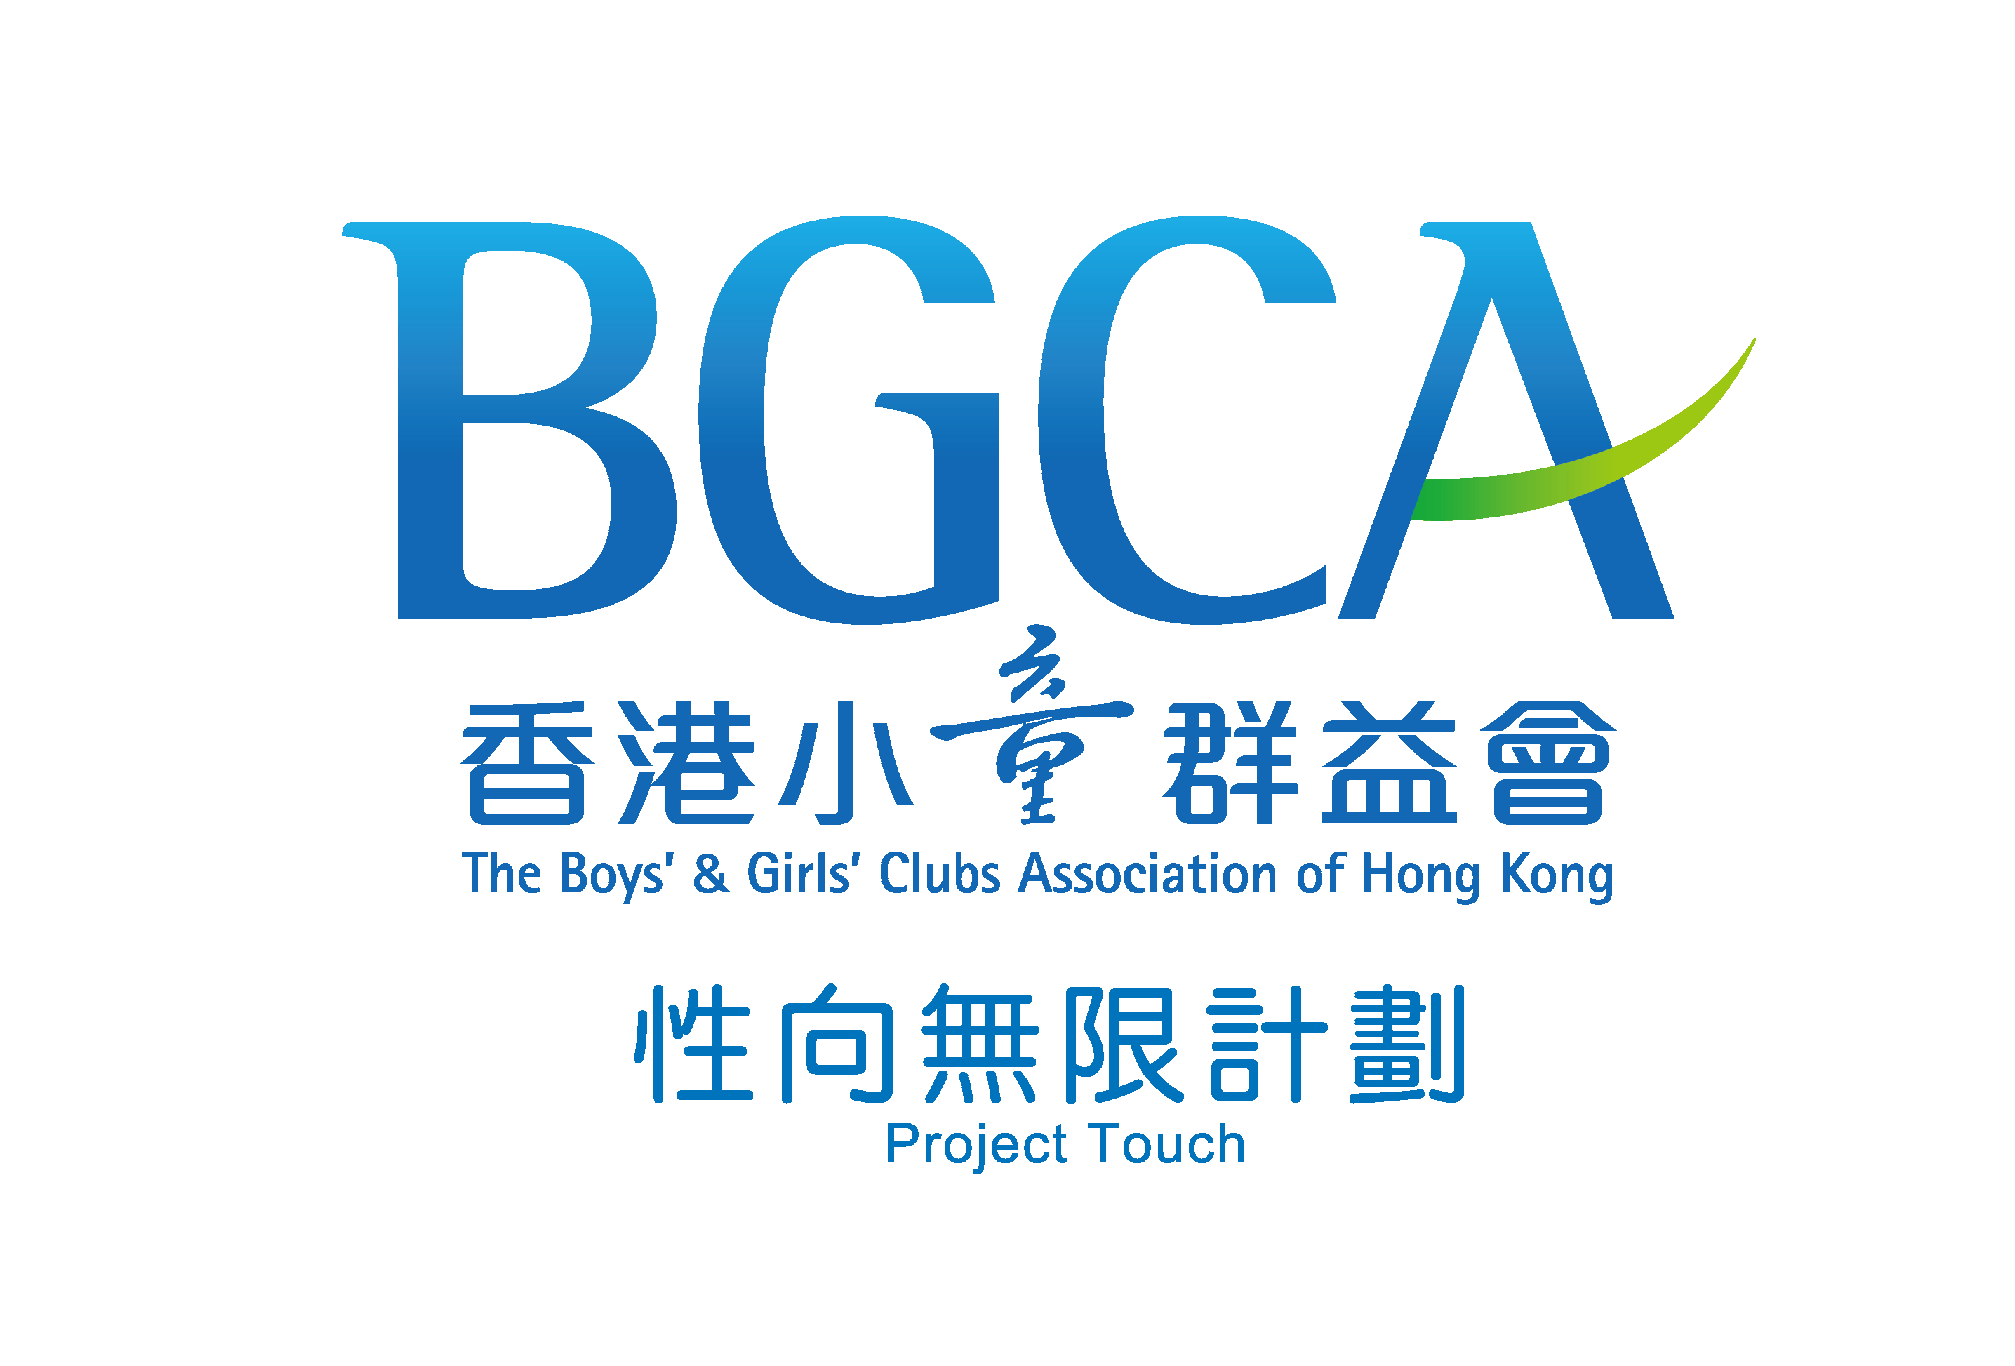 Project Touch of The Boys' & Girls' Clubs Association of Hong Kong